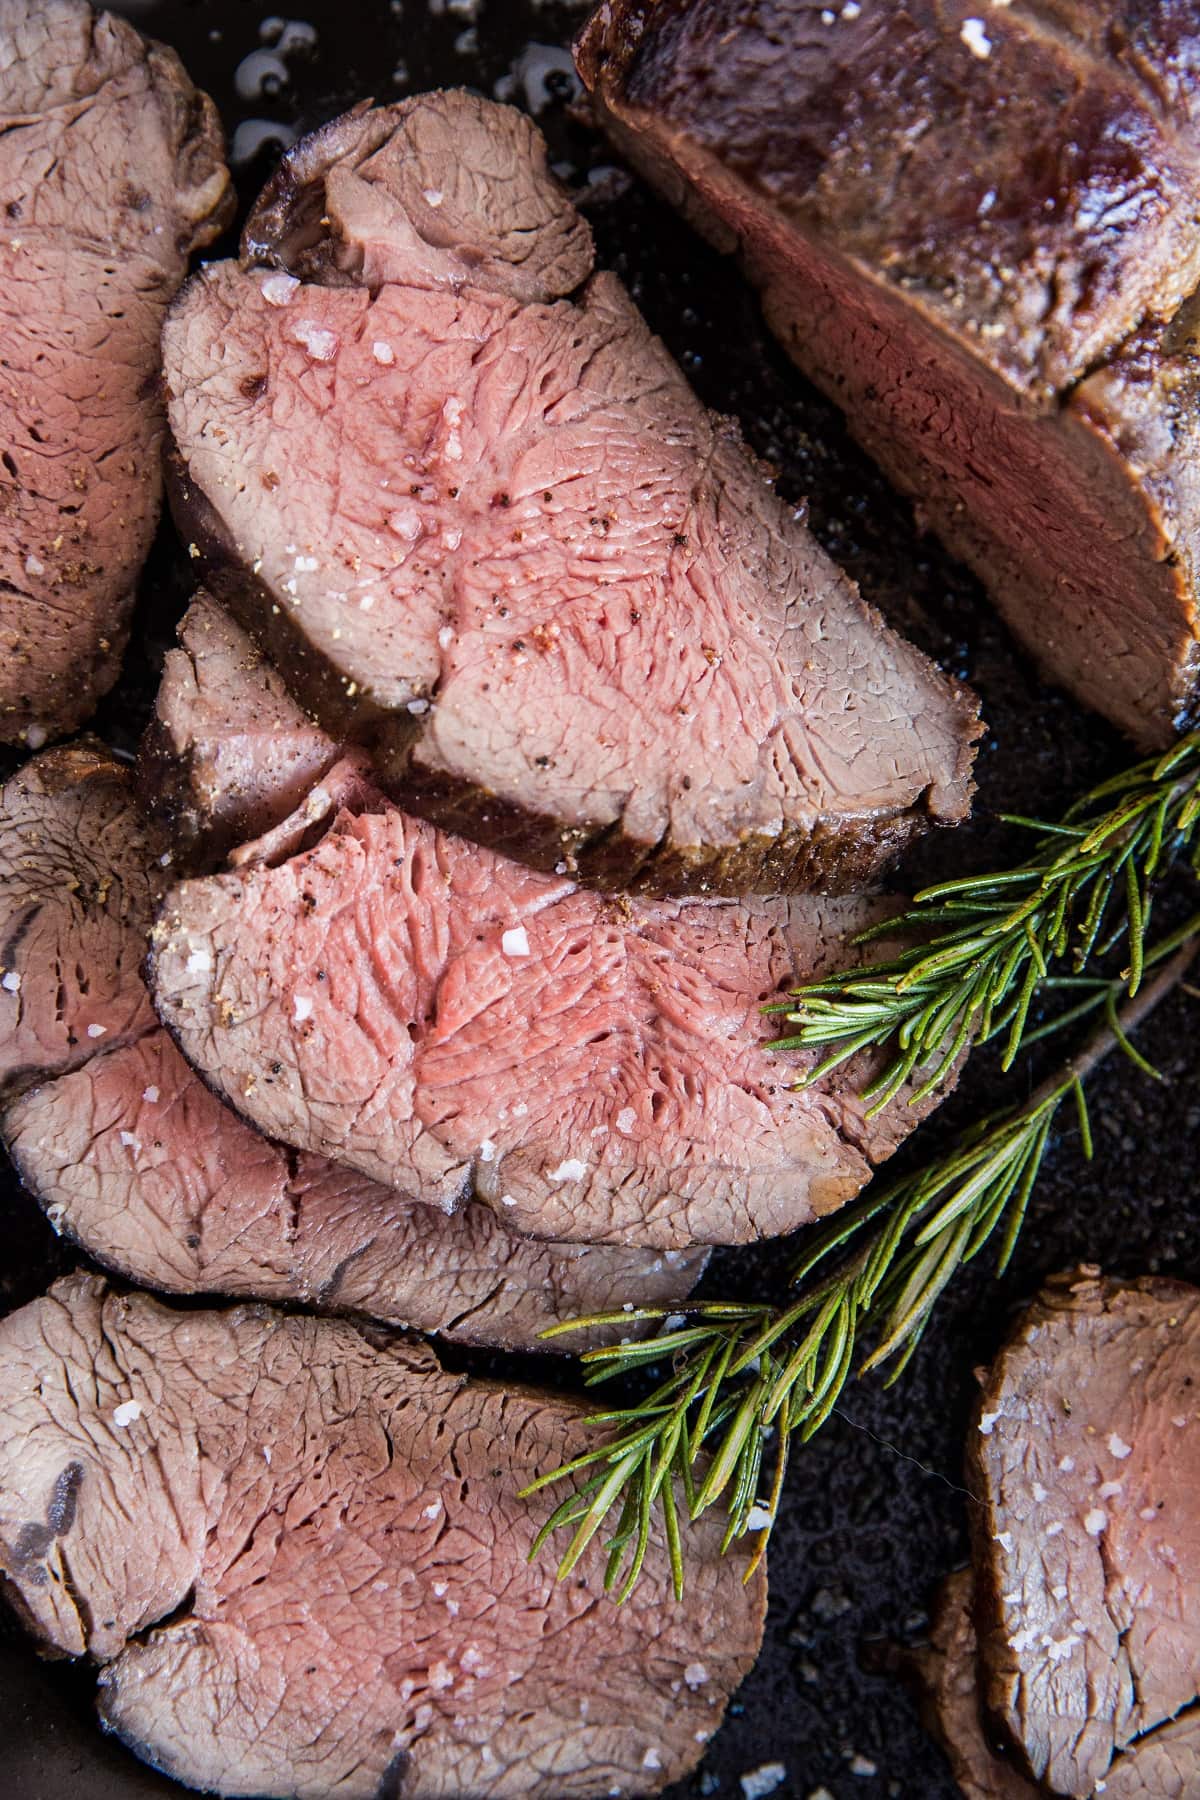 Beef Tenderloin Recipe - an easy tutorial on how to cook beef tenderloin, complete with all the tips for the perfect roast